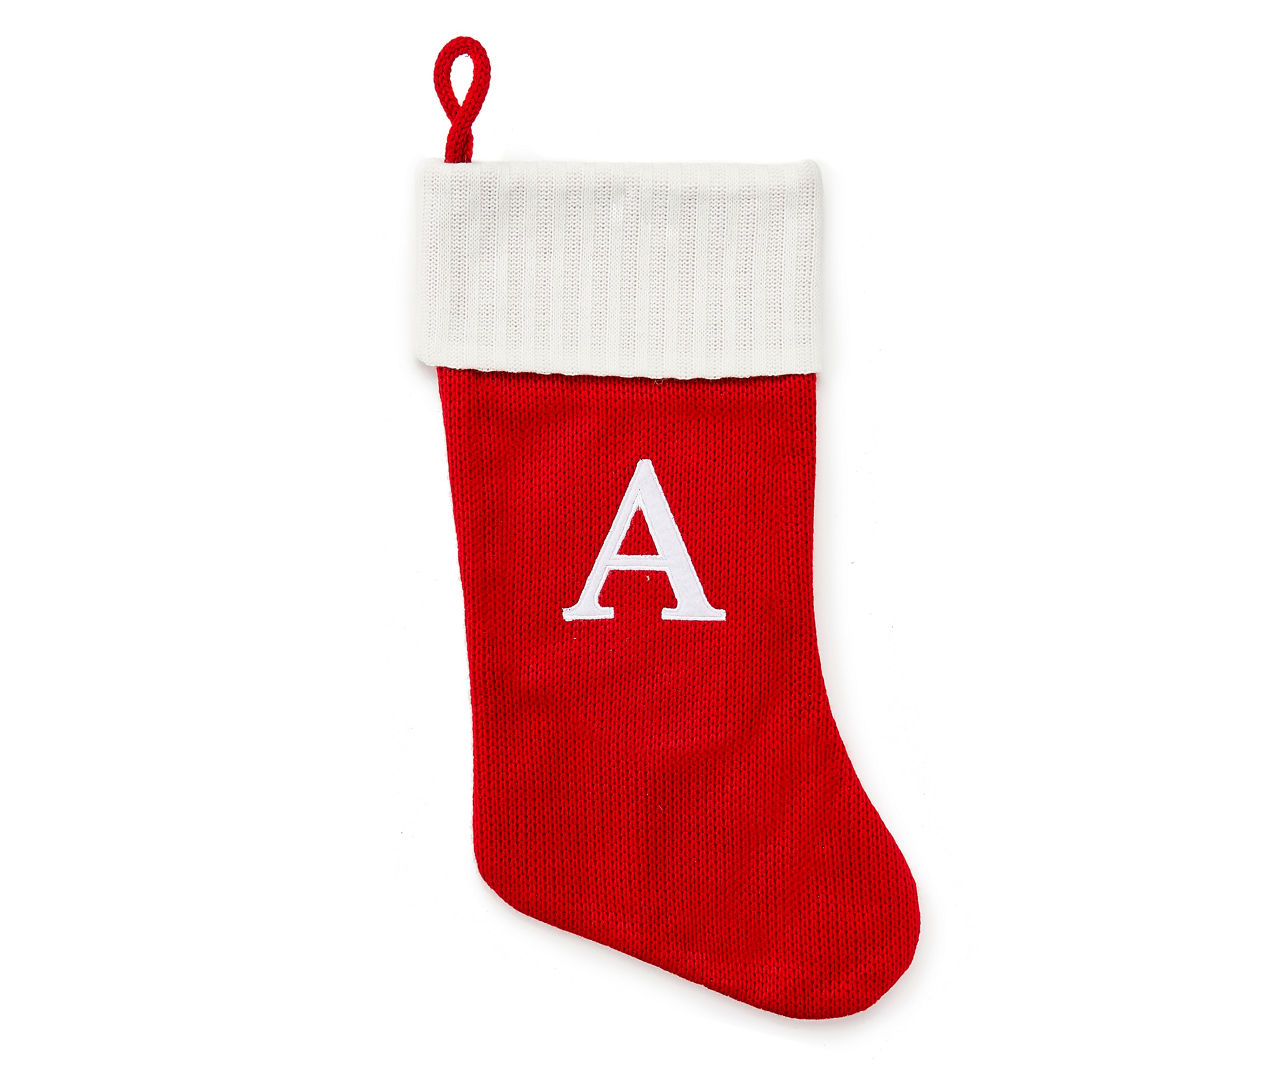 "A" Monogram Red Knit Stocking with White Trim